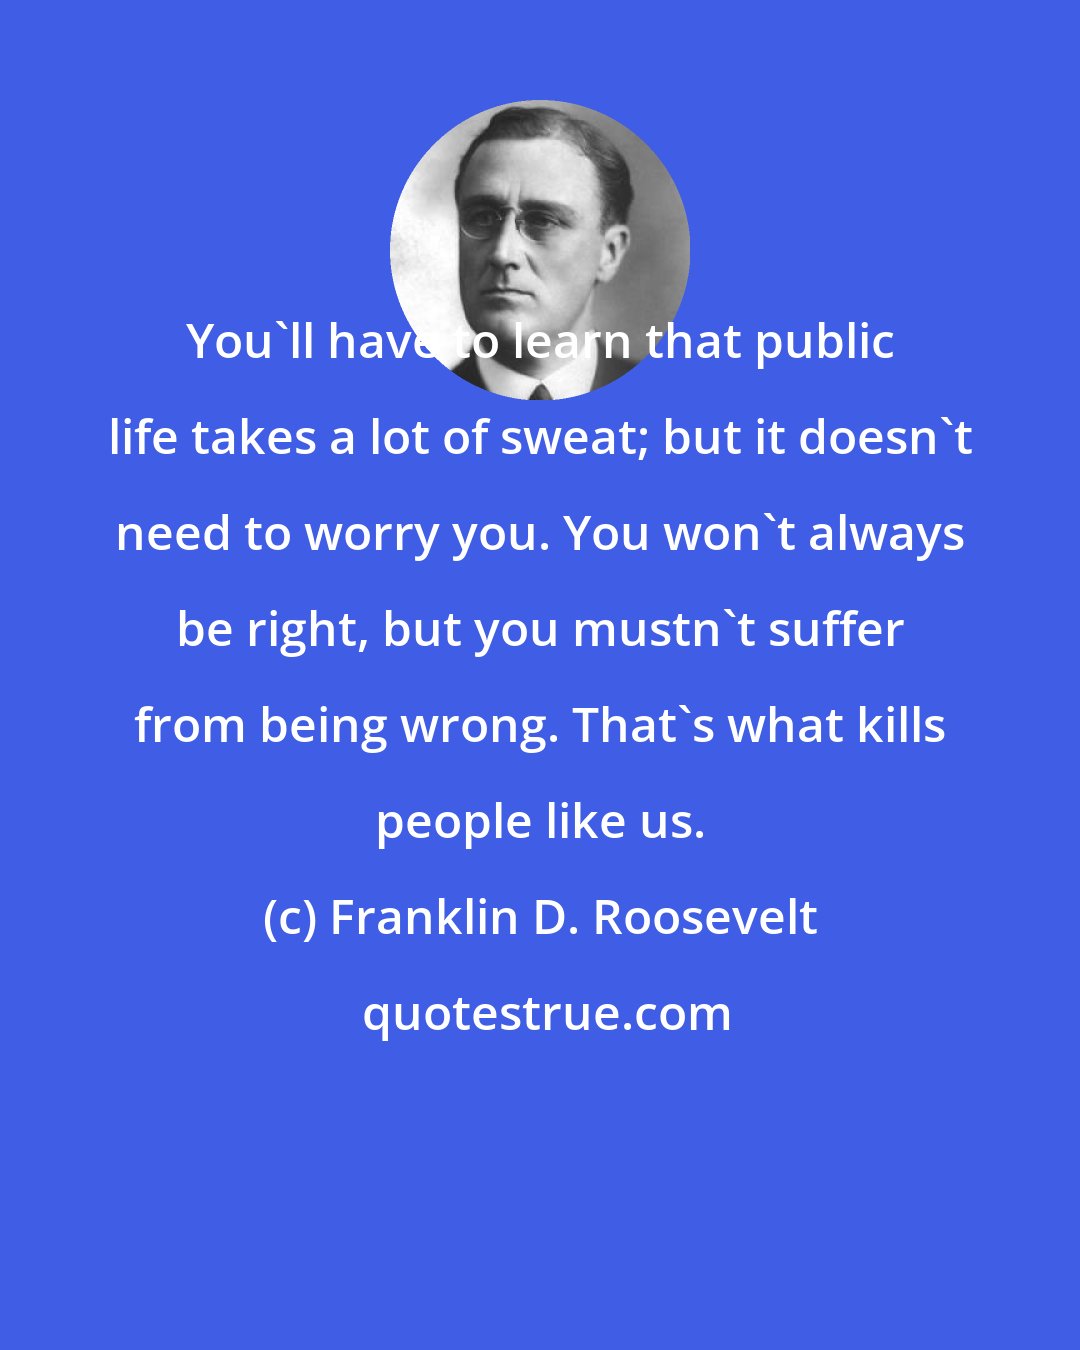 Franklin D. Roosevelt: You'll have to learn that public life takes a lot of sweat; but it doesn't need to worry you. You won't always be right, but you mustn't suffer from being wrong. That's what kills people like us.